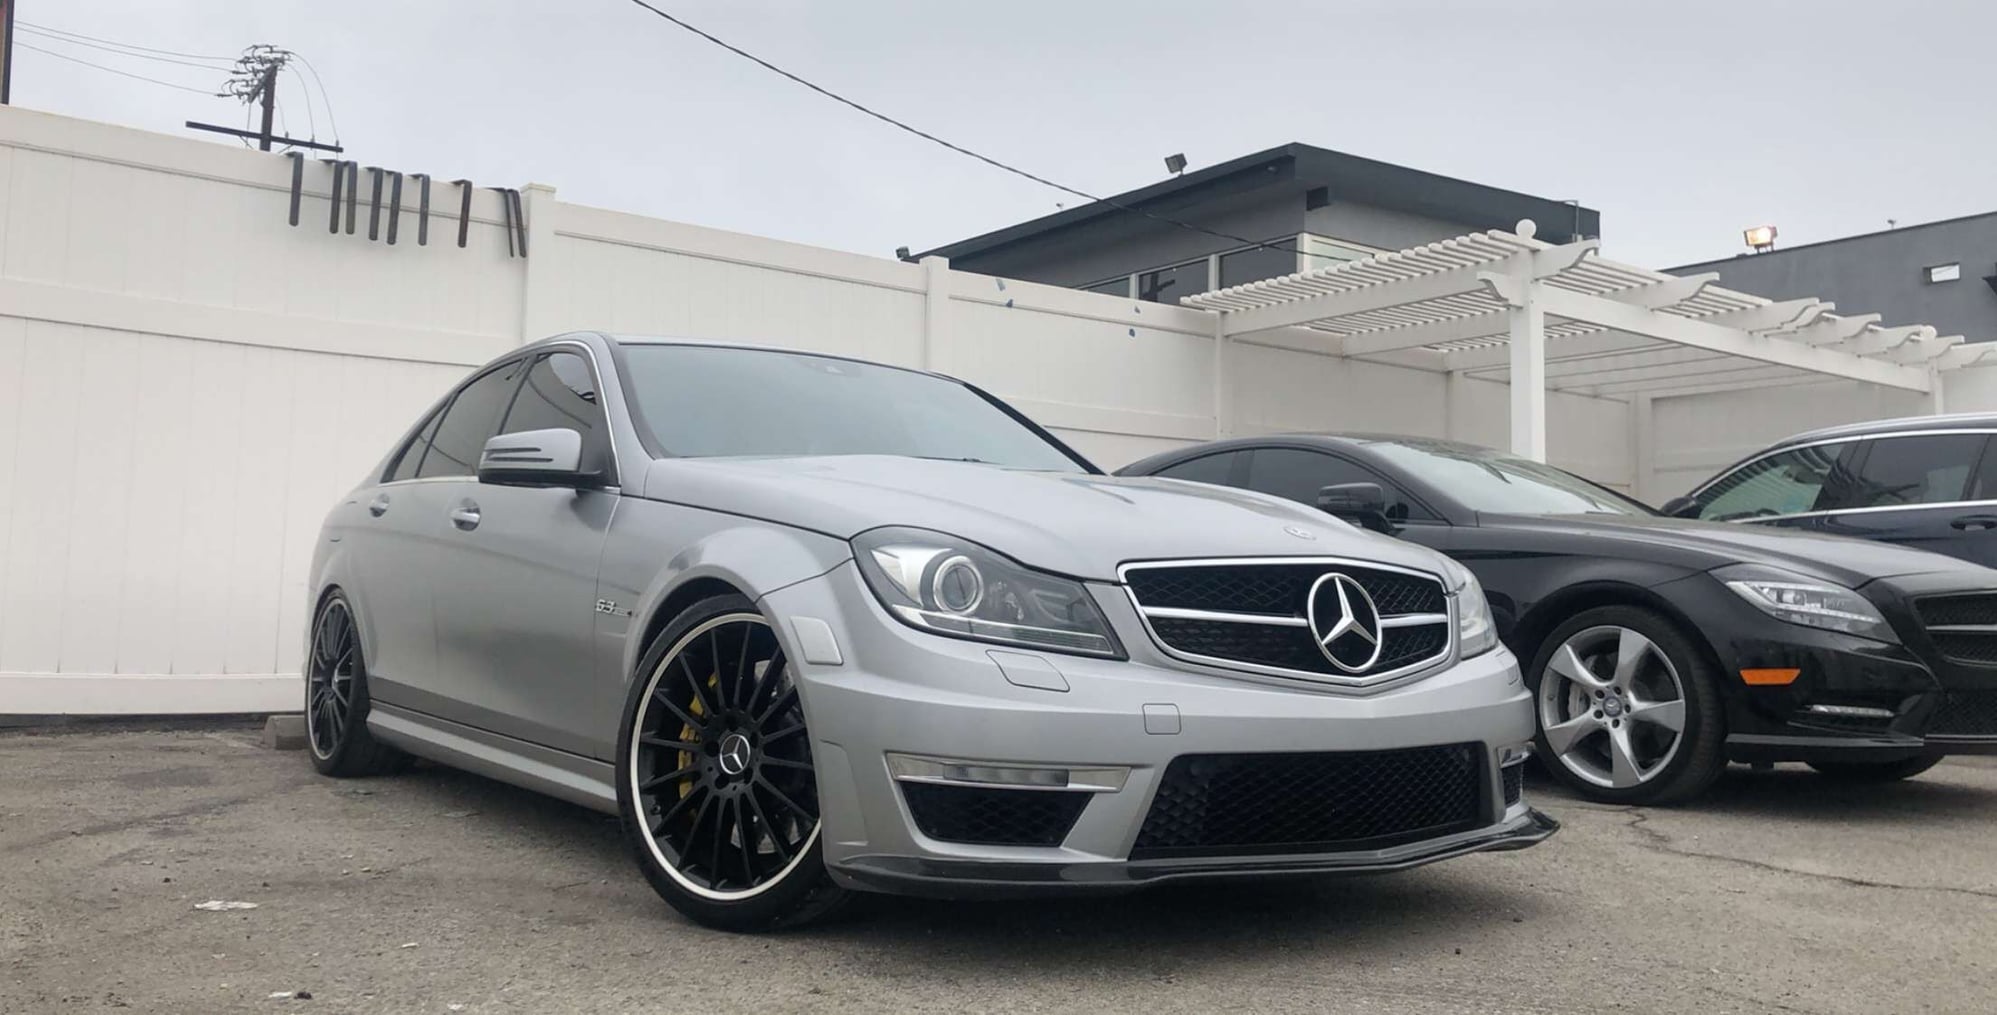 Wheels and Tires/Axles - 2012 MERCEDES BENZ C63 EDITION 1 WHEELS - Used - 2012 to 2014 Mercedes-Benz C63 AMG - Van Nuys, CA 91405, United States